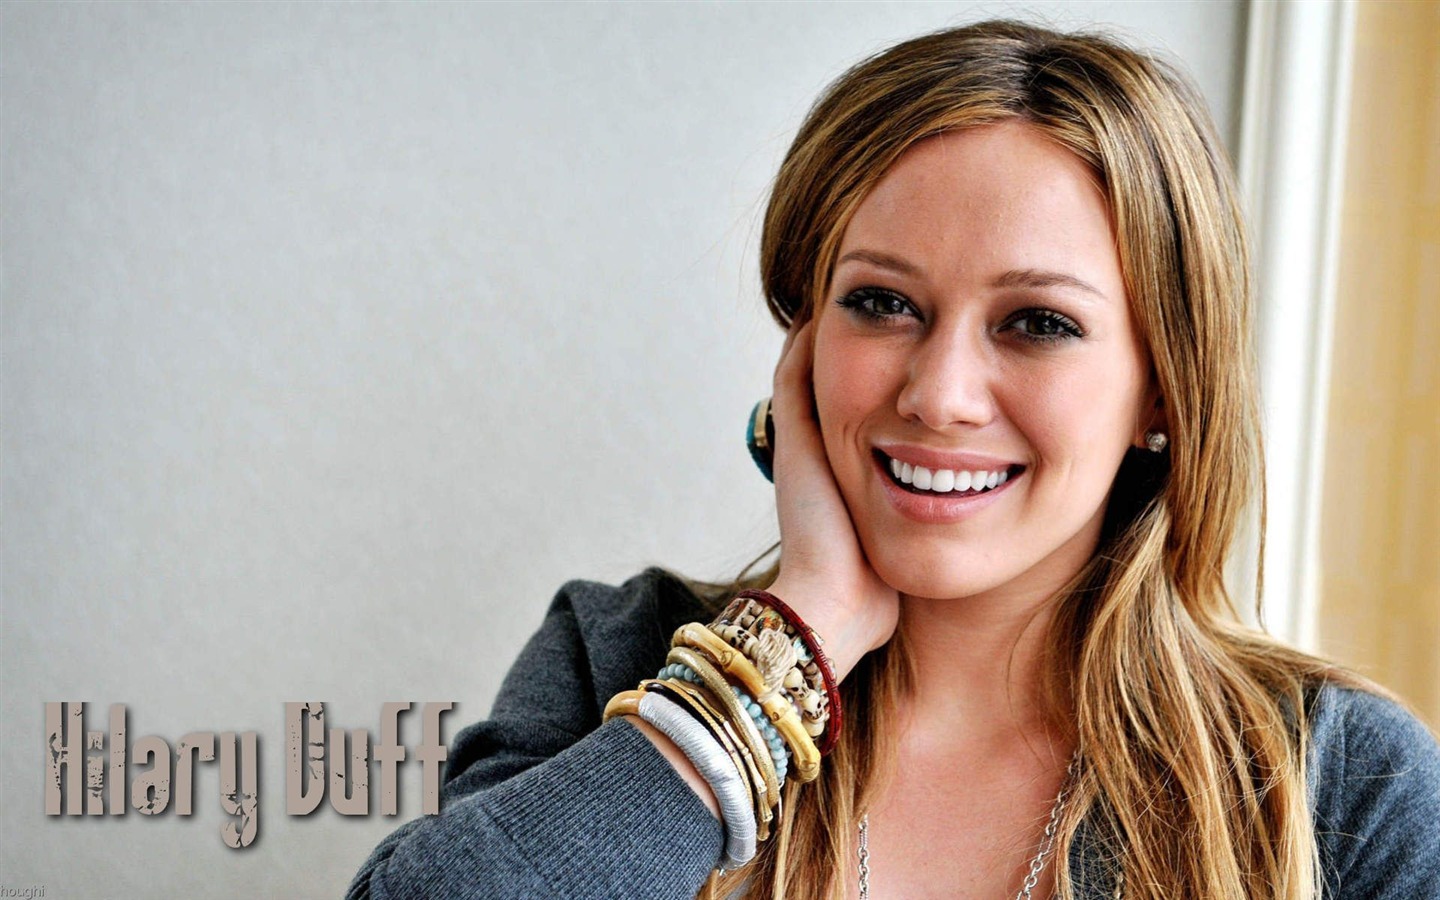 Hilary Duff #061 - 1440x900 Wallpapers Pictures Photos Images